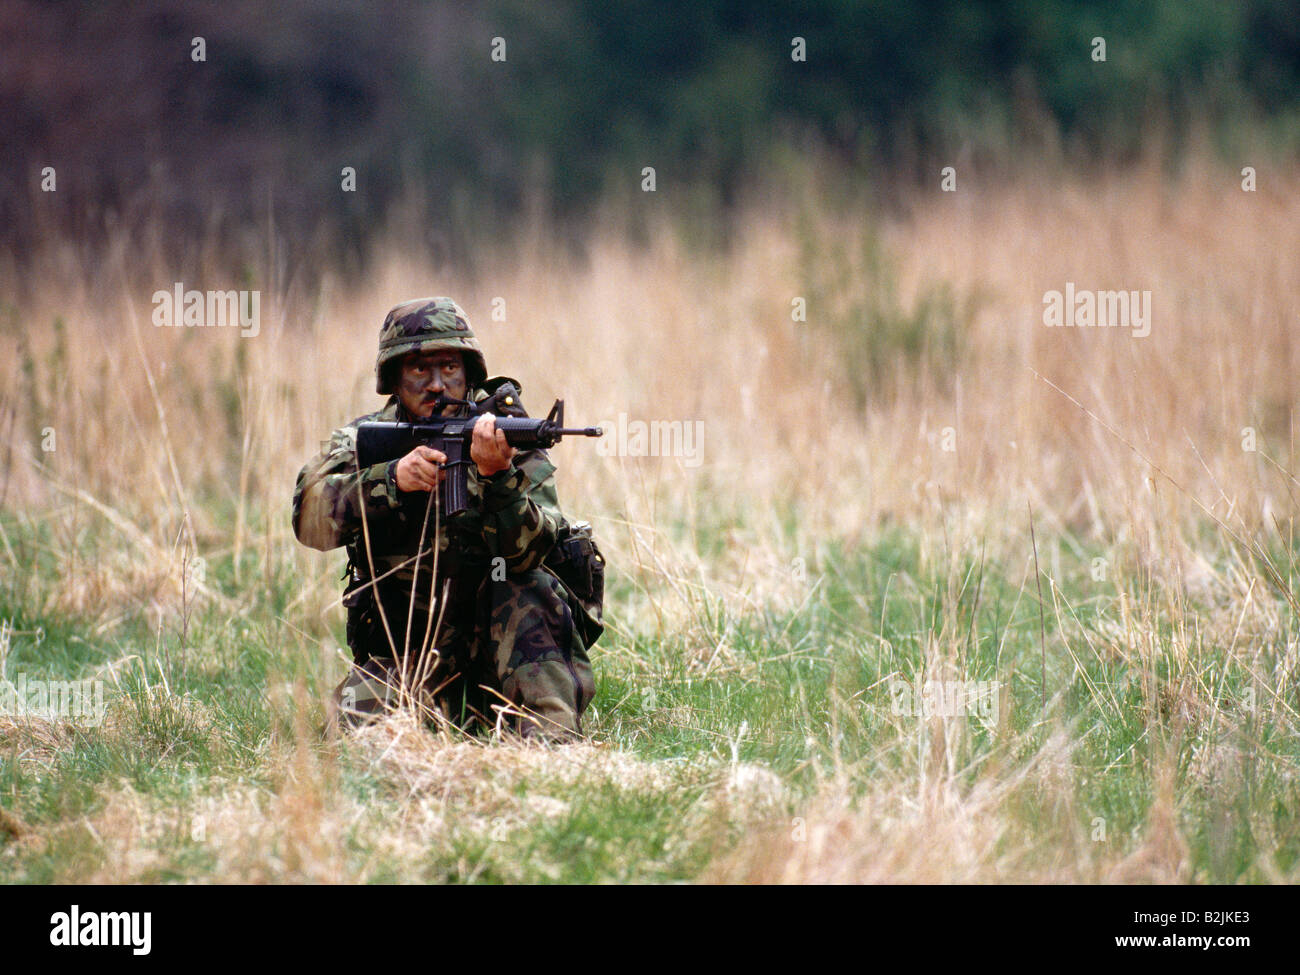 US Army soldier sulle manovre in campo Foto Stock